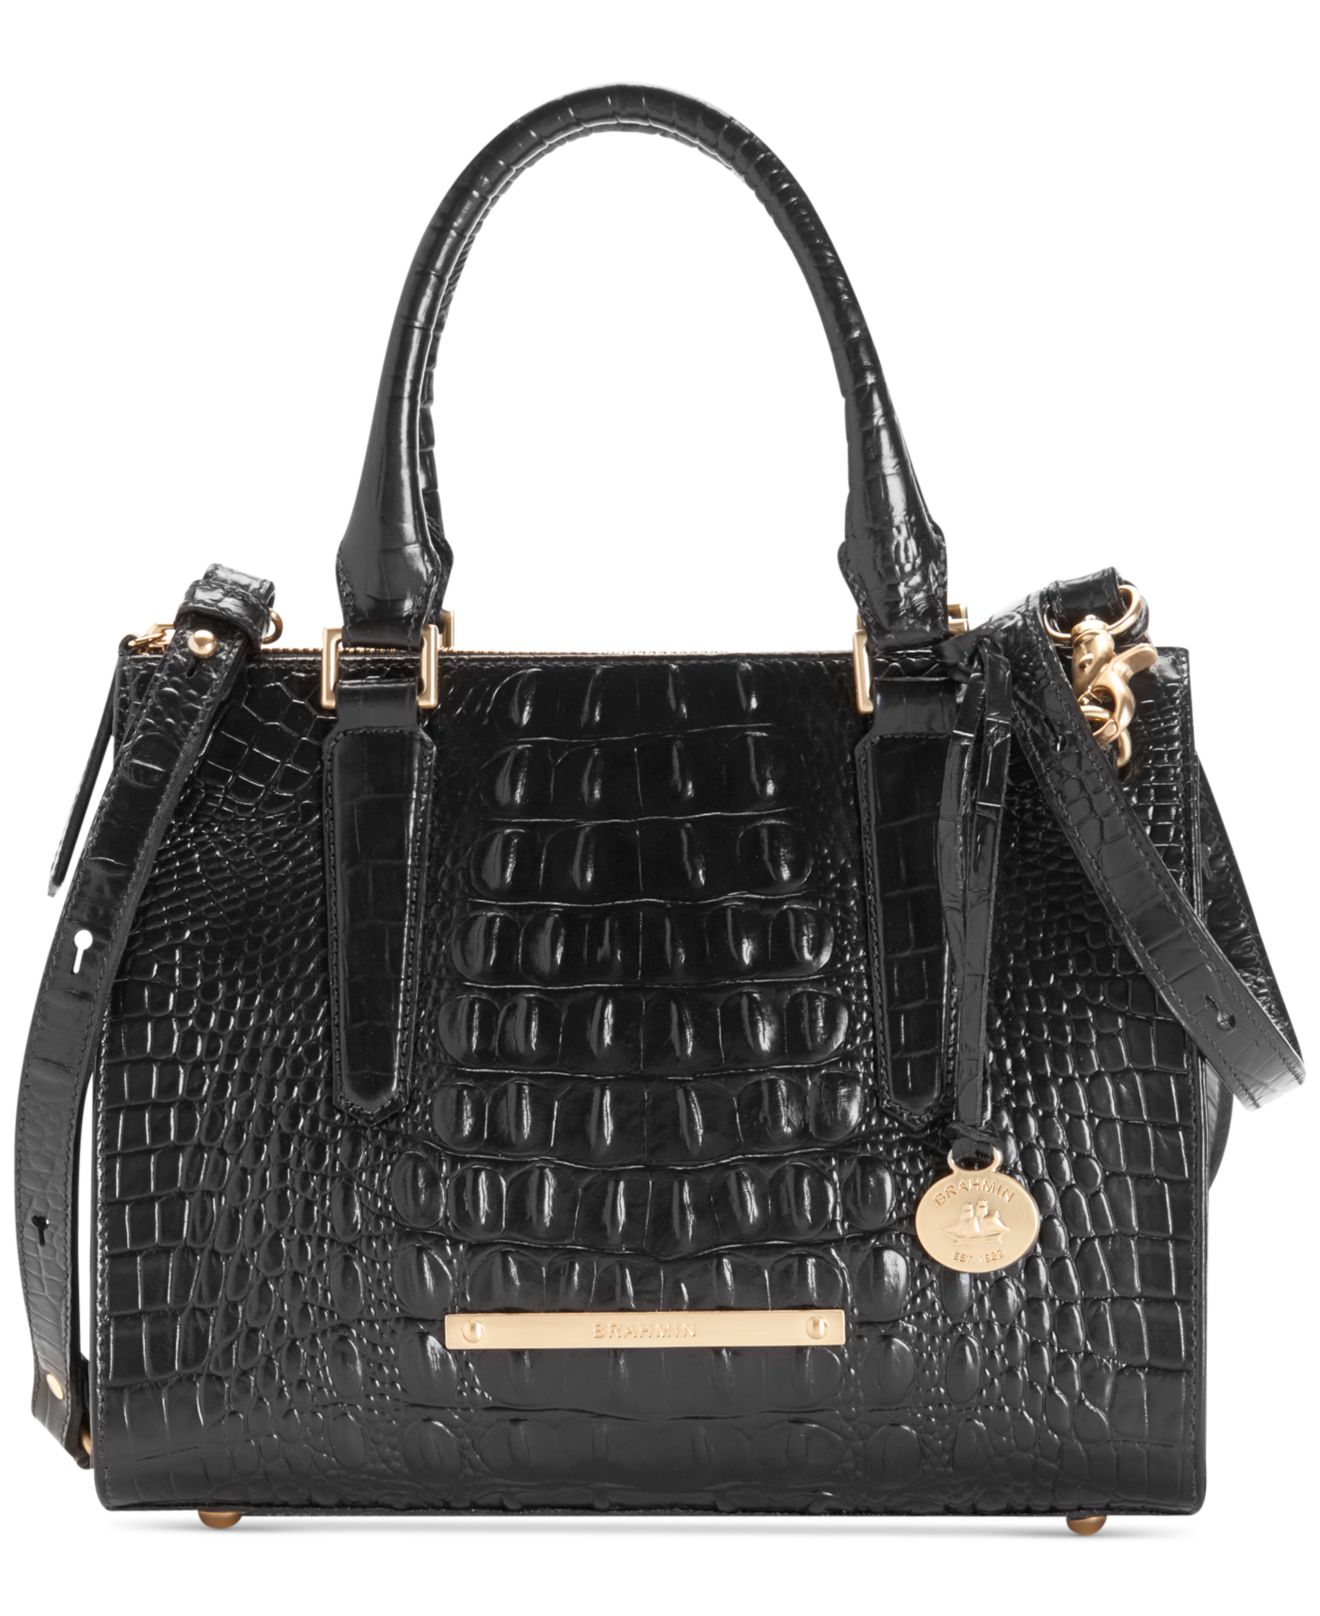 Brahmin Leather Anywhere Convertible Satchel in Black - Lyst